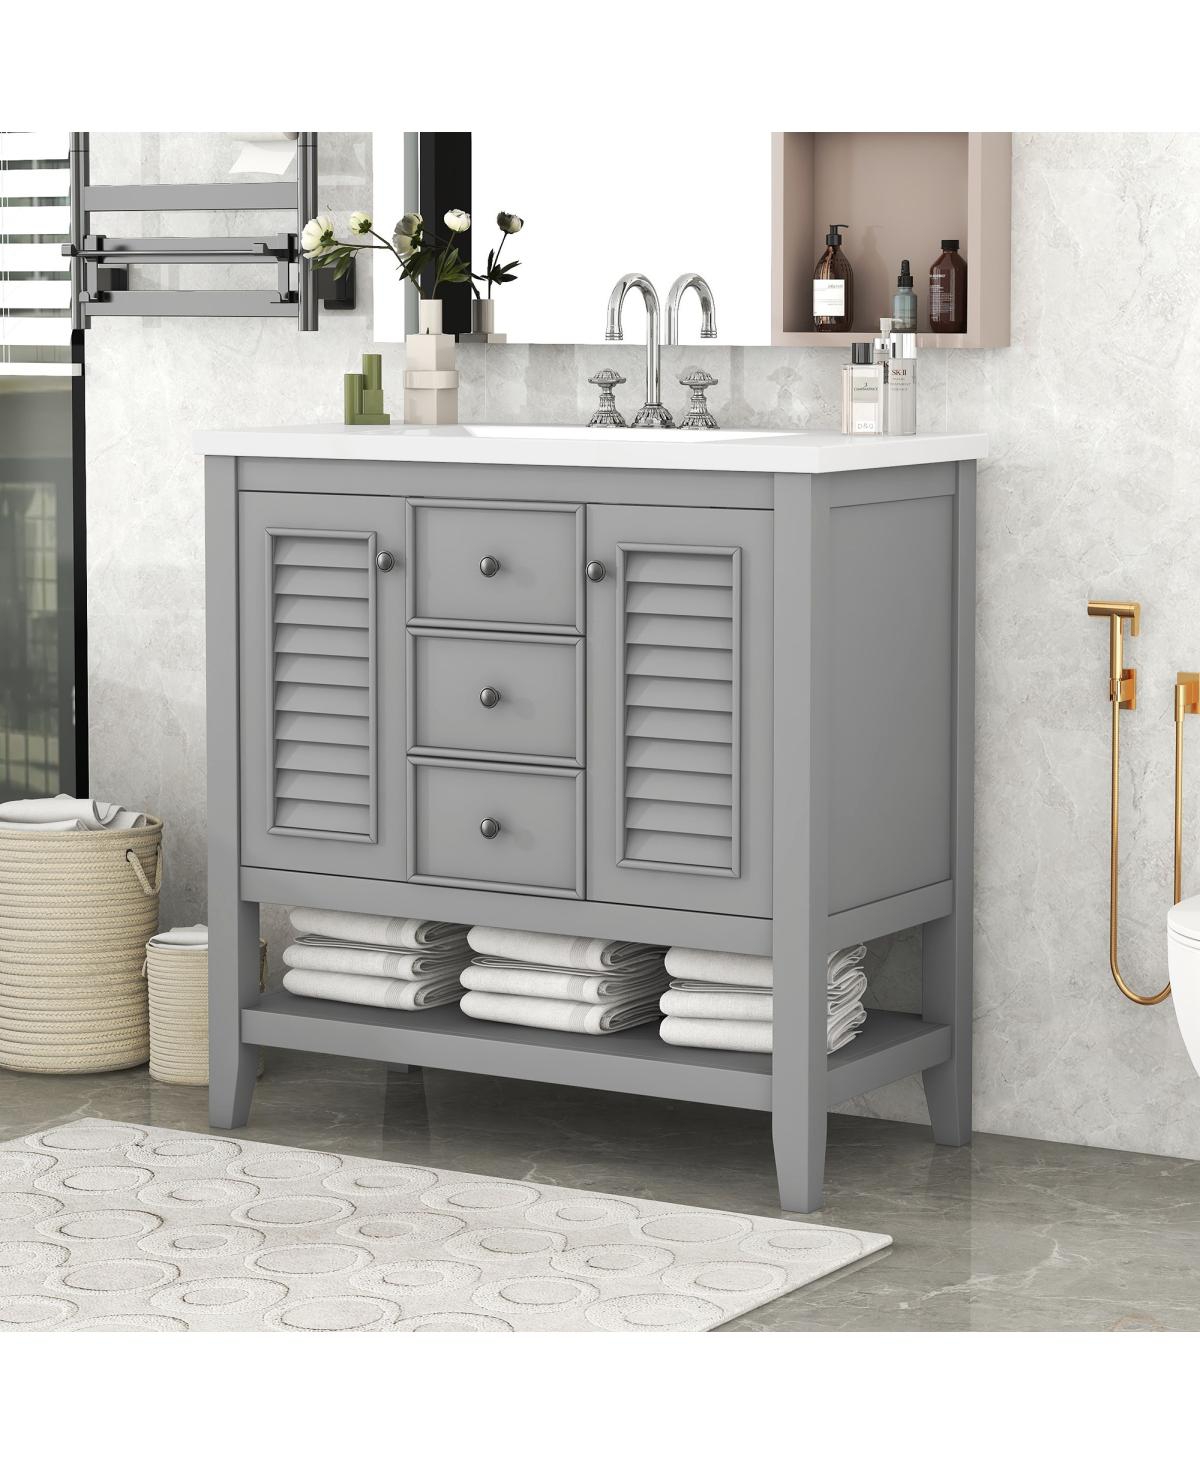 36" Bathroom Vanity With Ceramic Basin, Two Cabinets And Drawers, Open Shelf, Solid Wood Frame - Grey